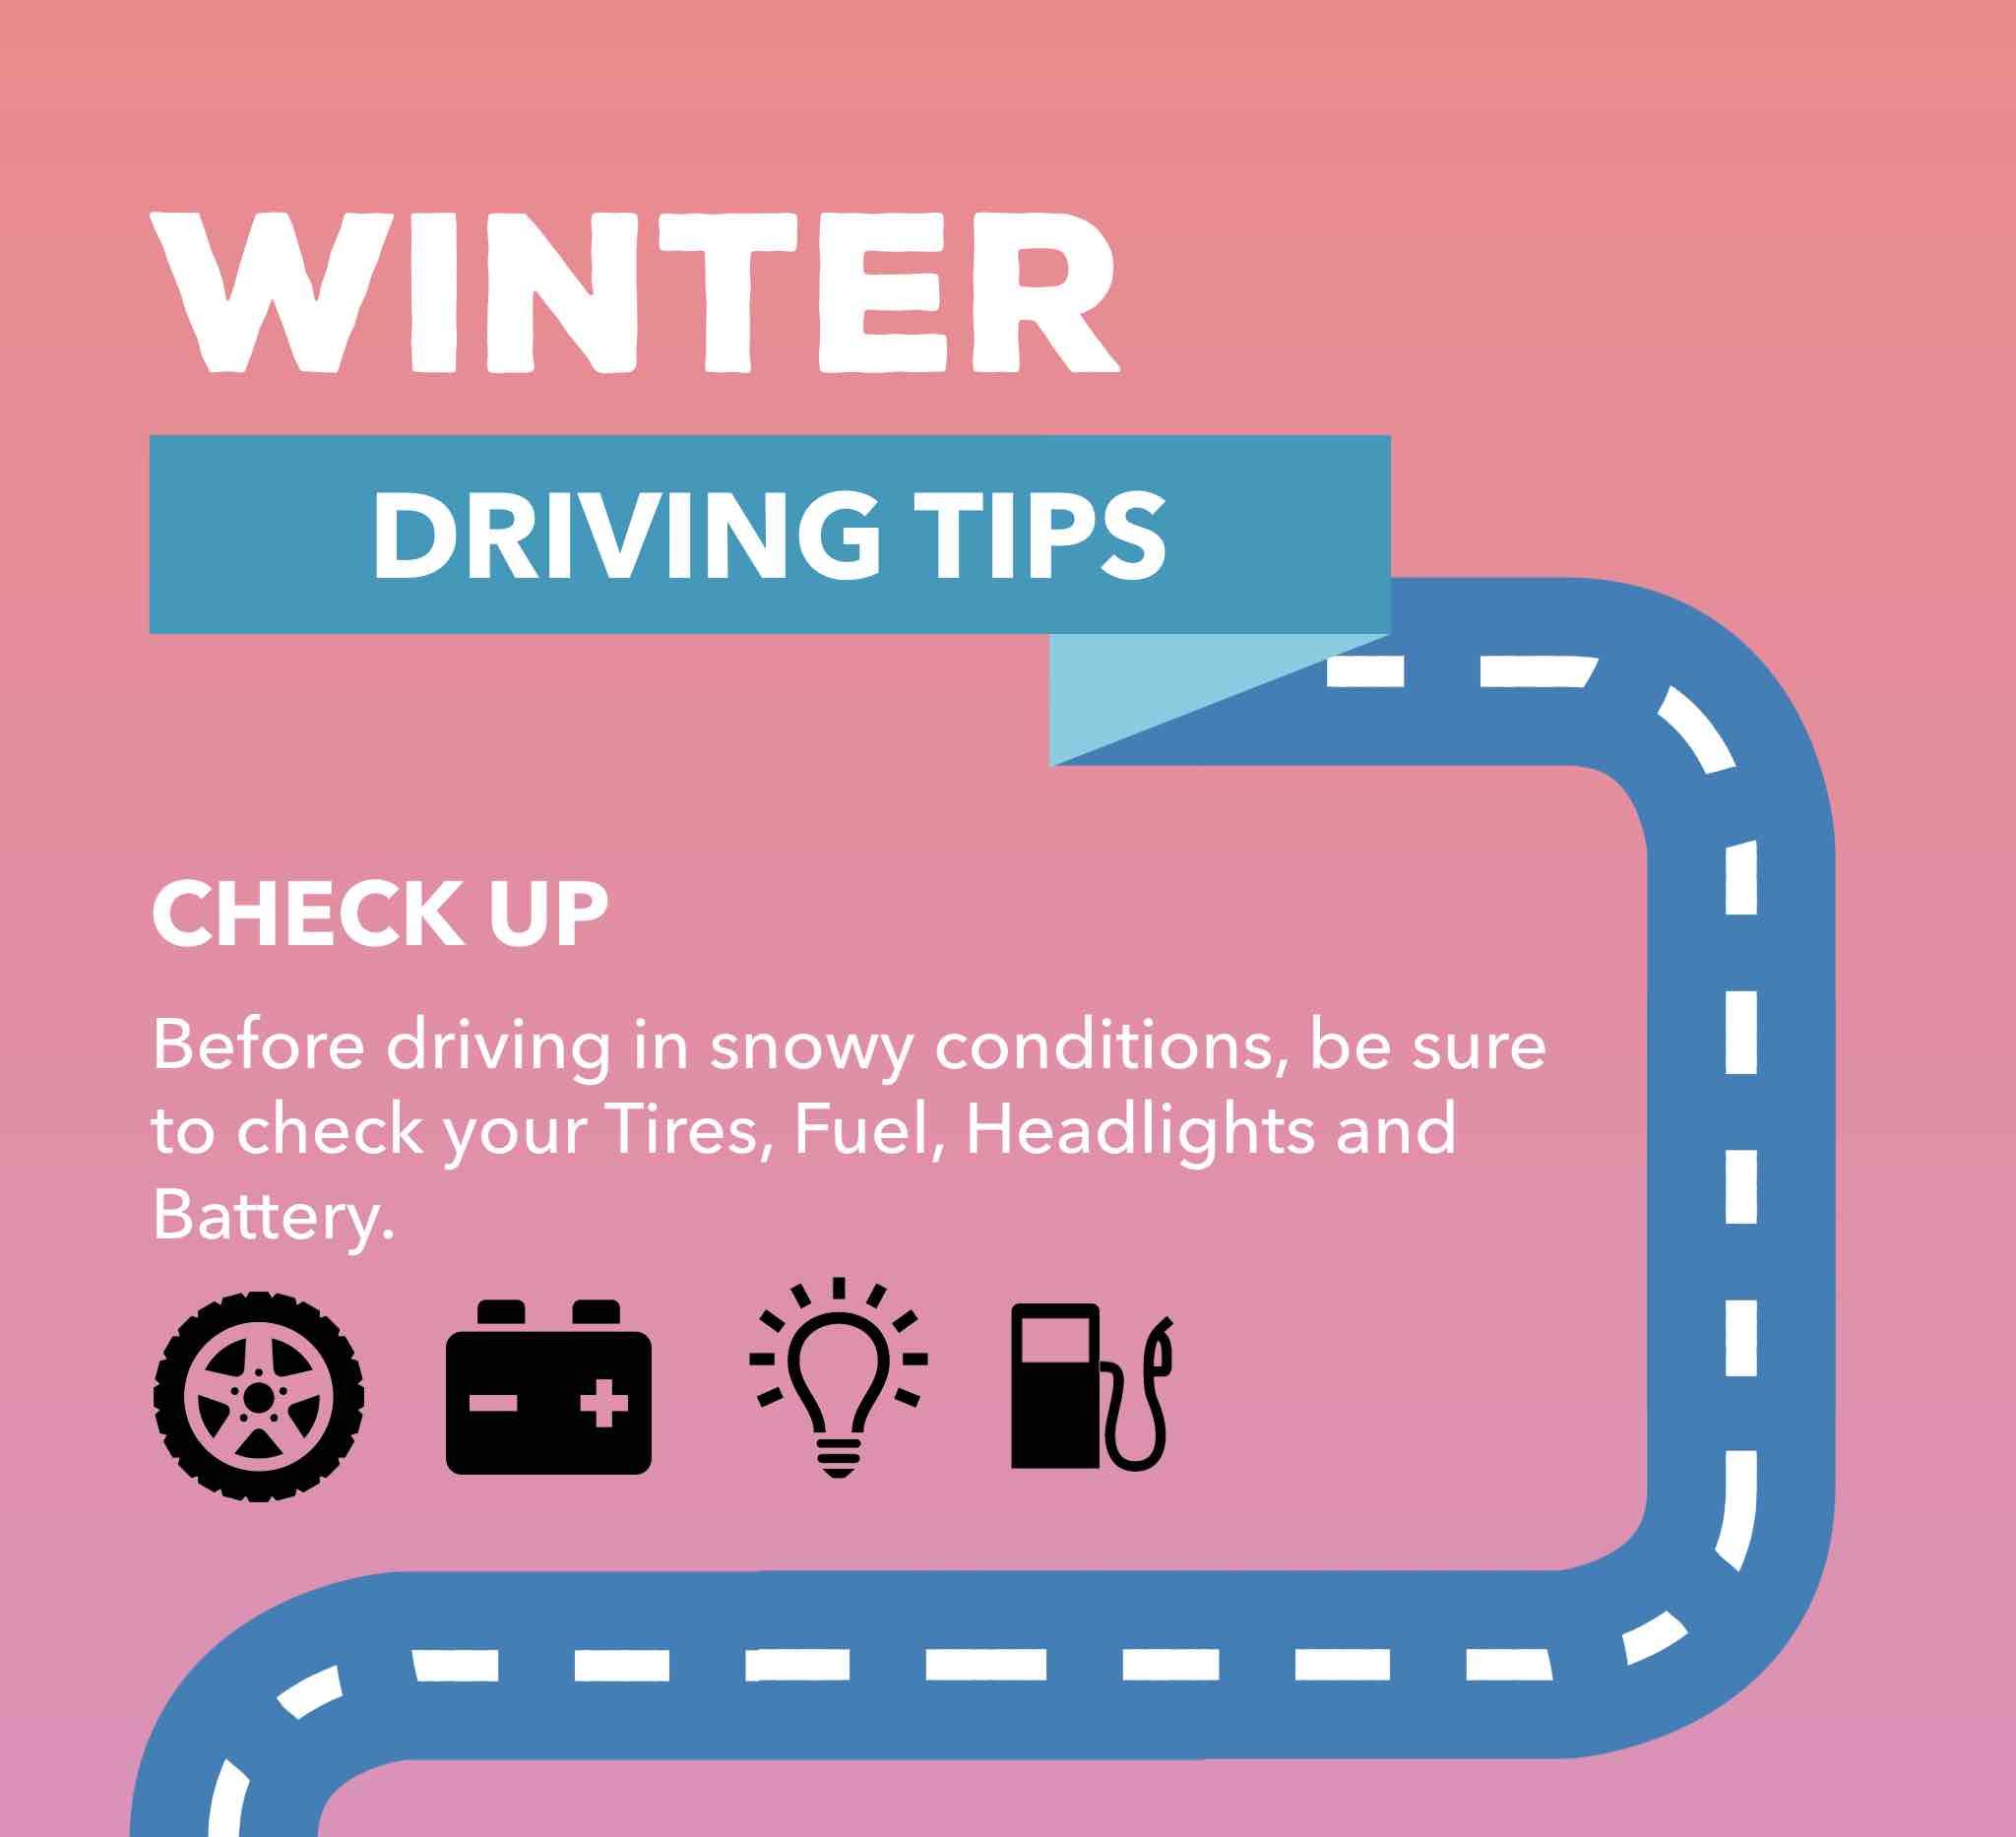 Before driving in snowy conditions, be sure  to check your Tires, Fuel, Headlights and Battery.